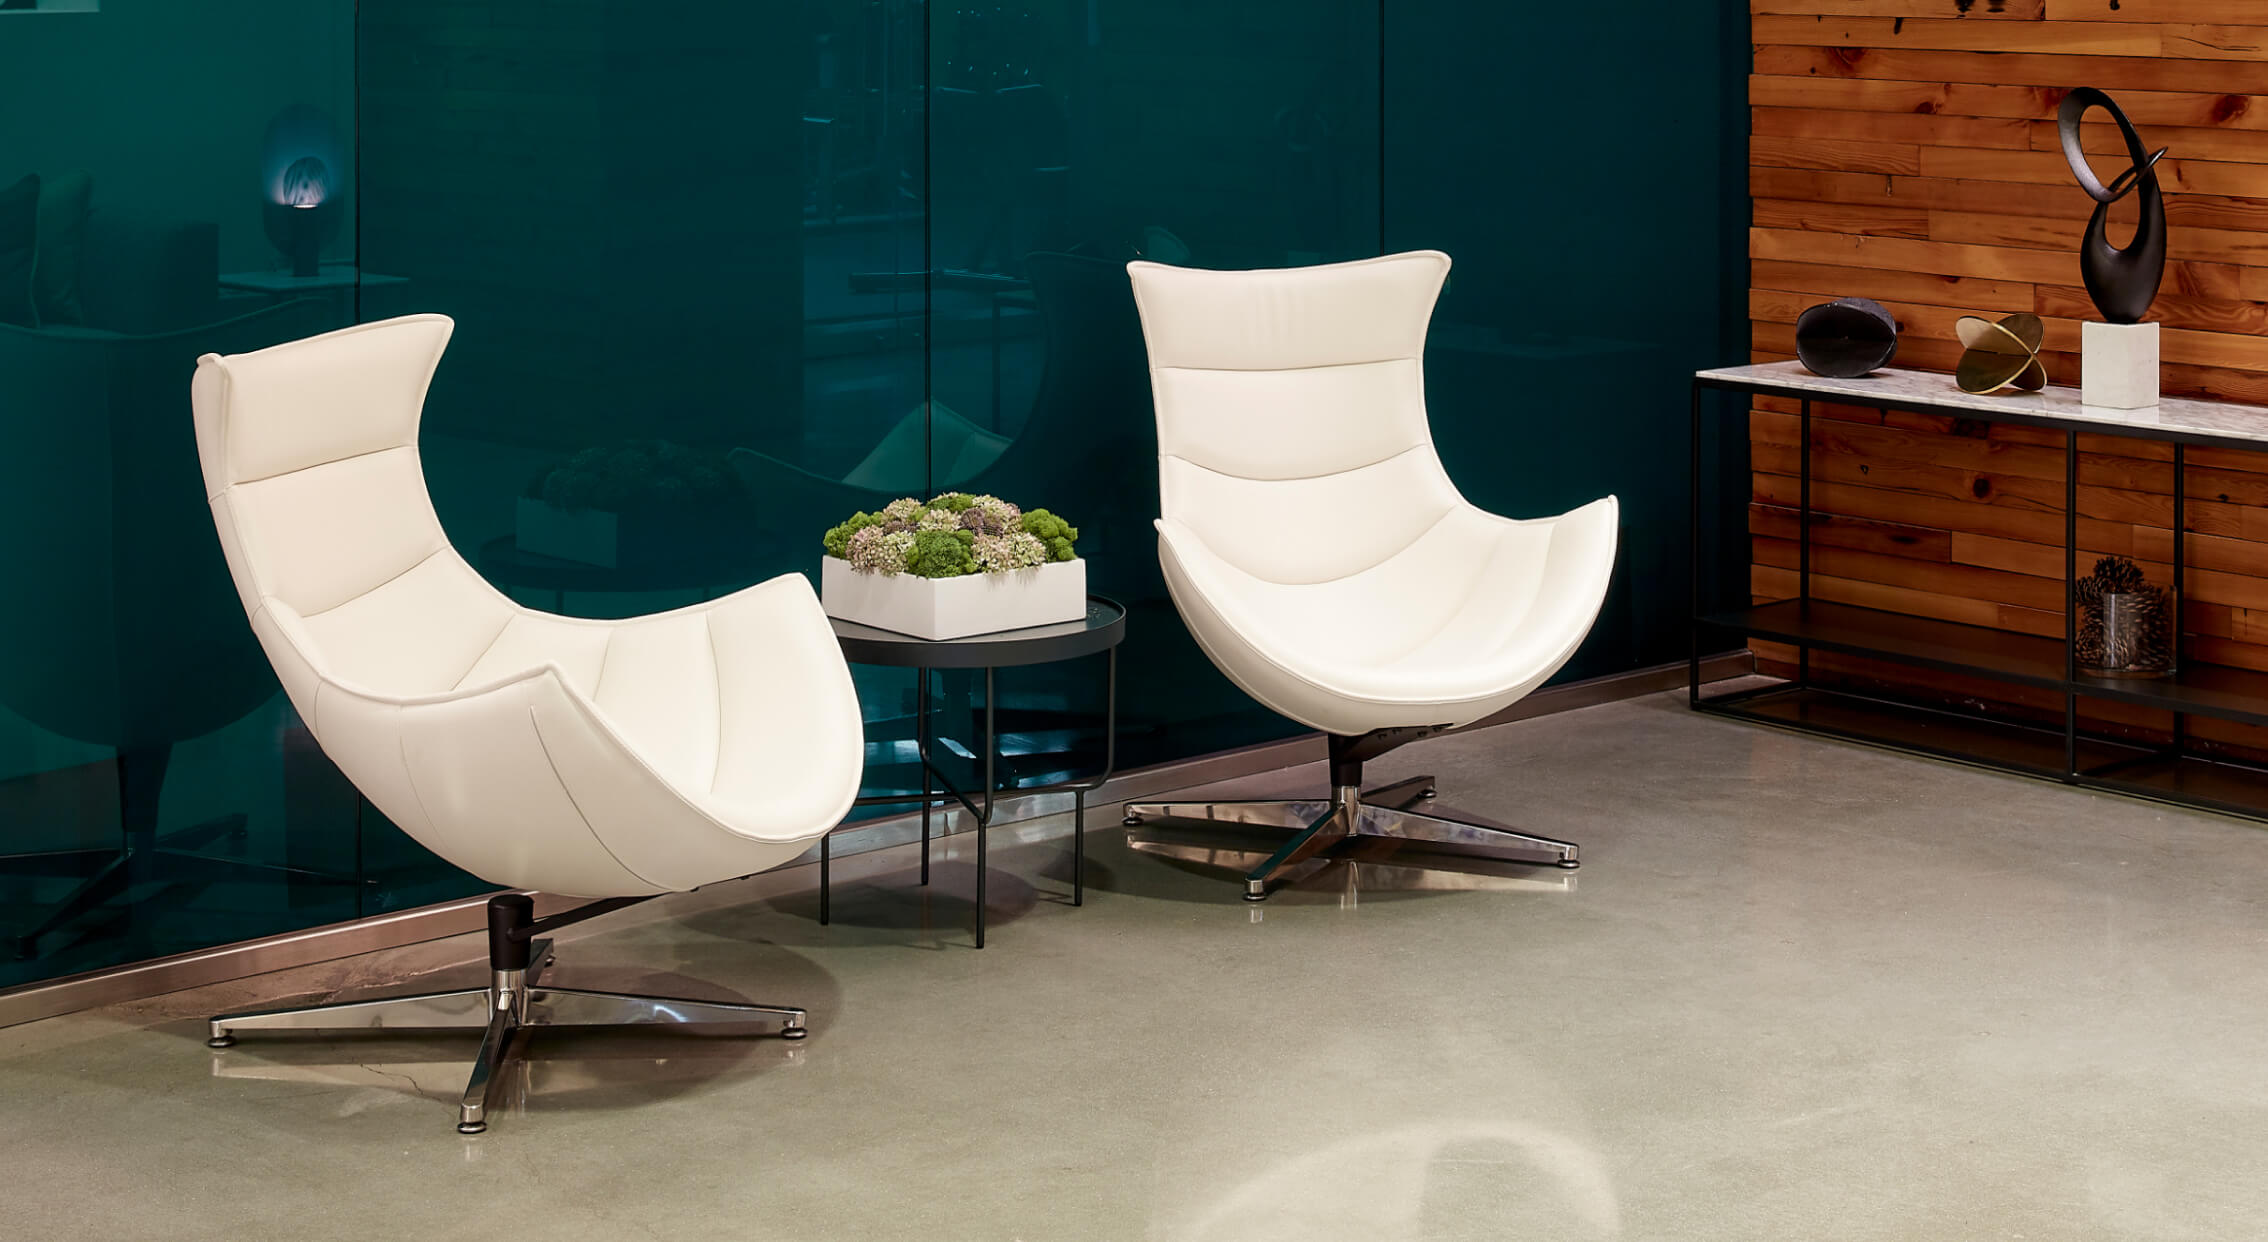 Modern Chairs with plant in lobby